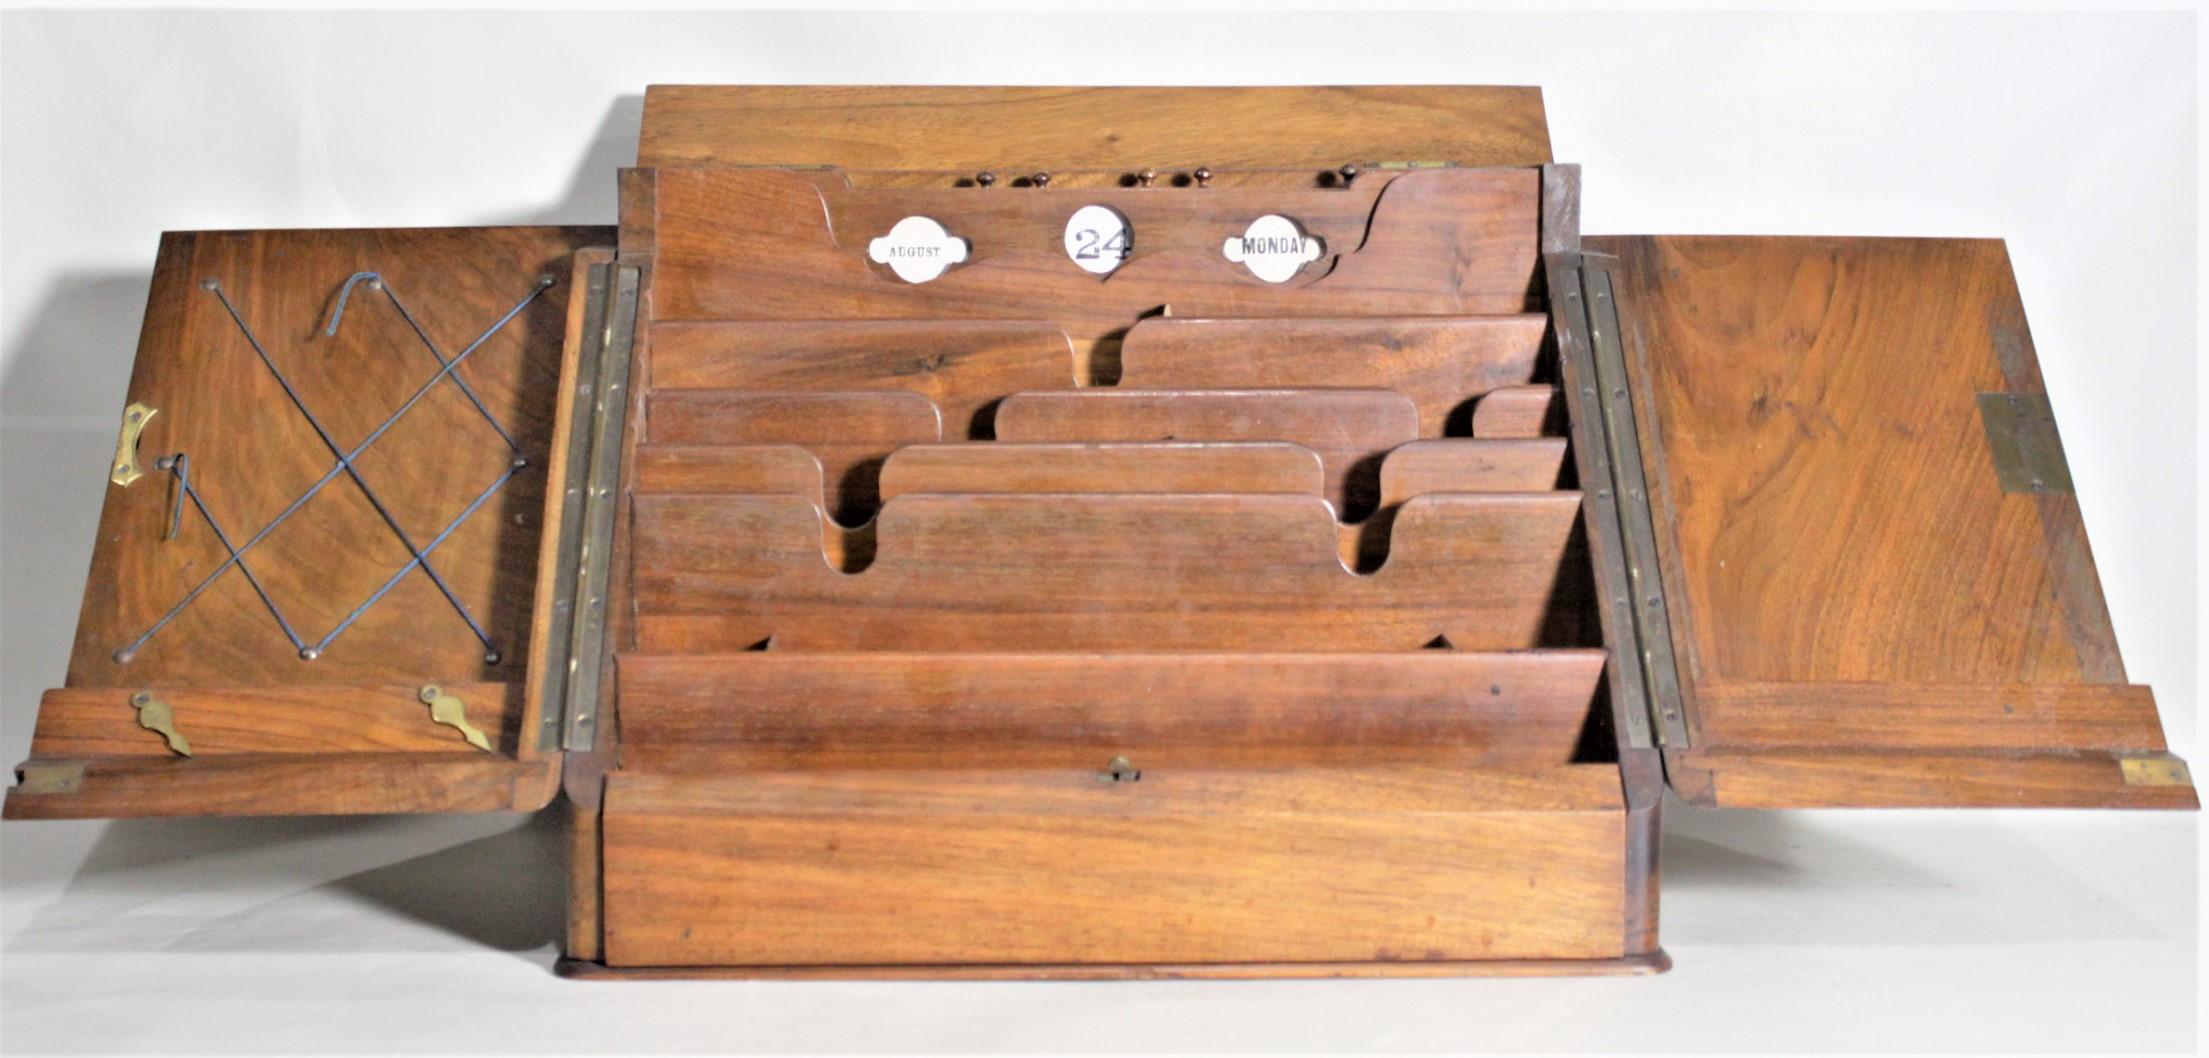 Antique Mahogany Desk Top Organizer or Storage Chest with Perpetual Calendar In Good Condition For Sale In Hamilton, Ontario